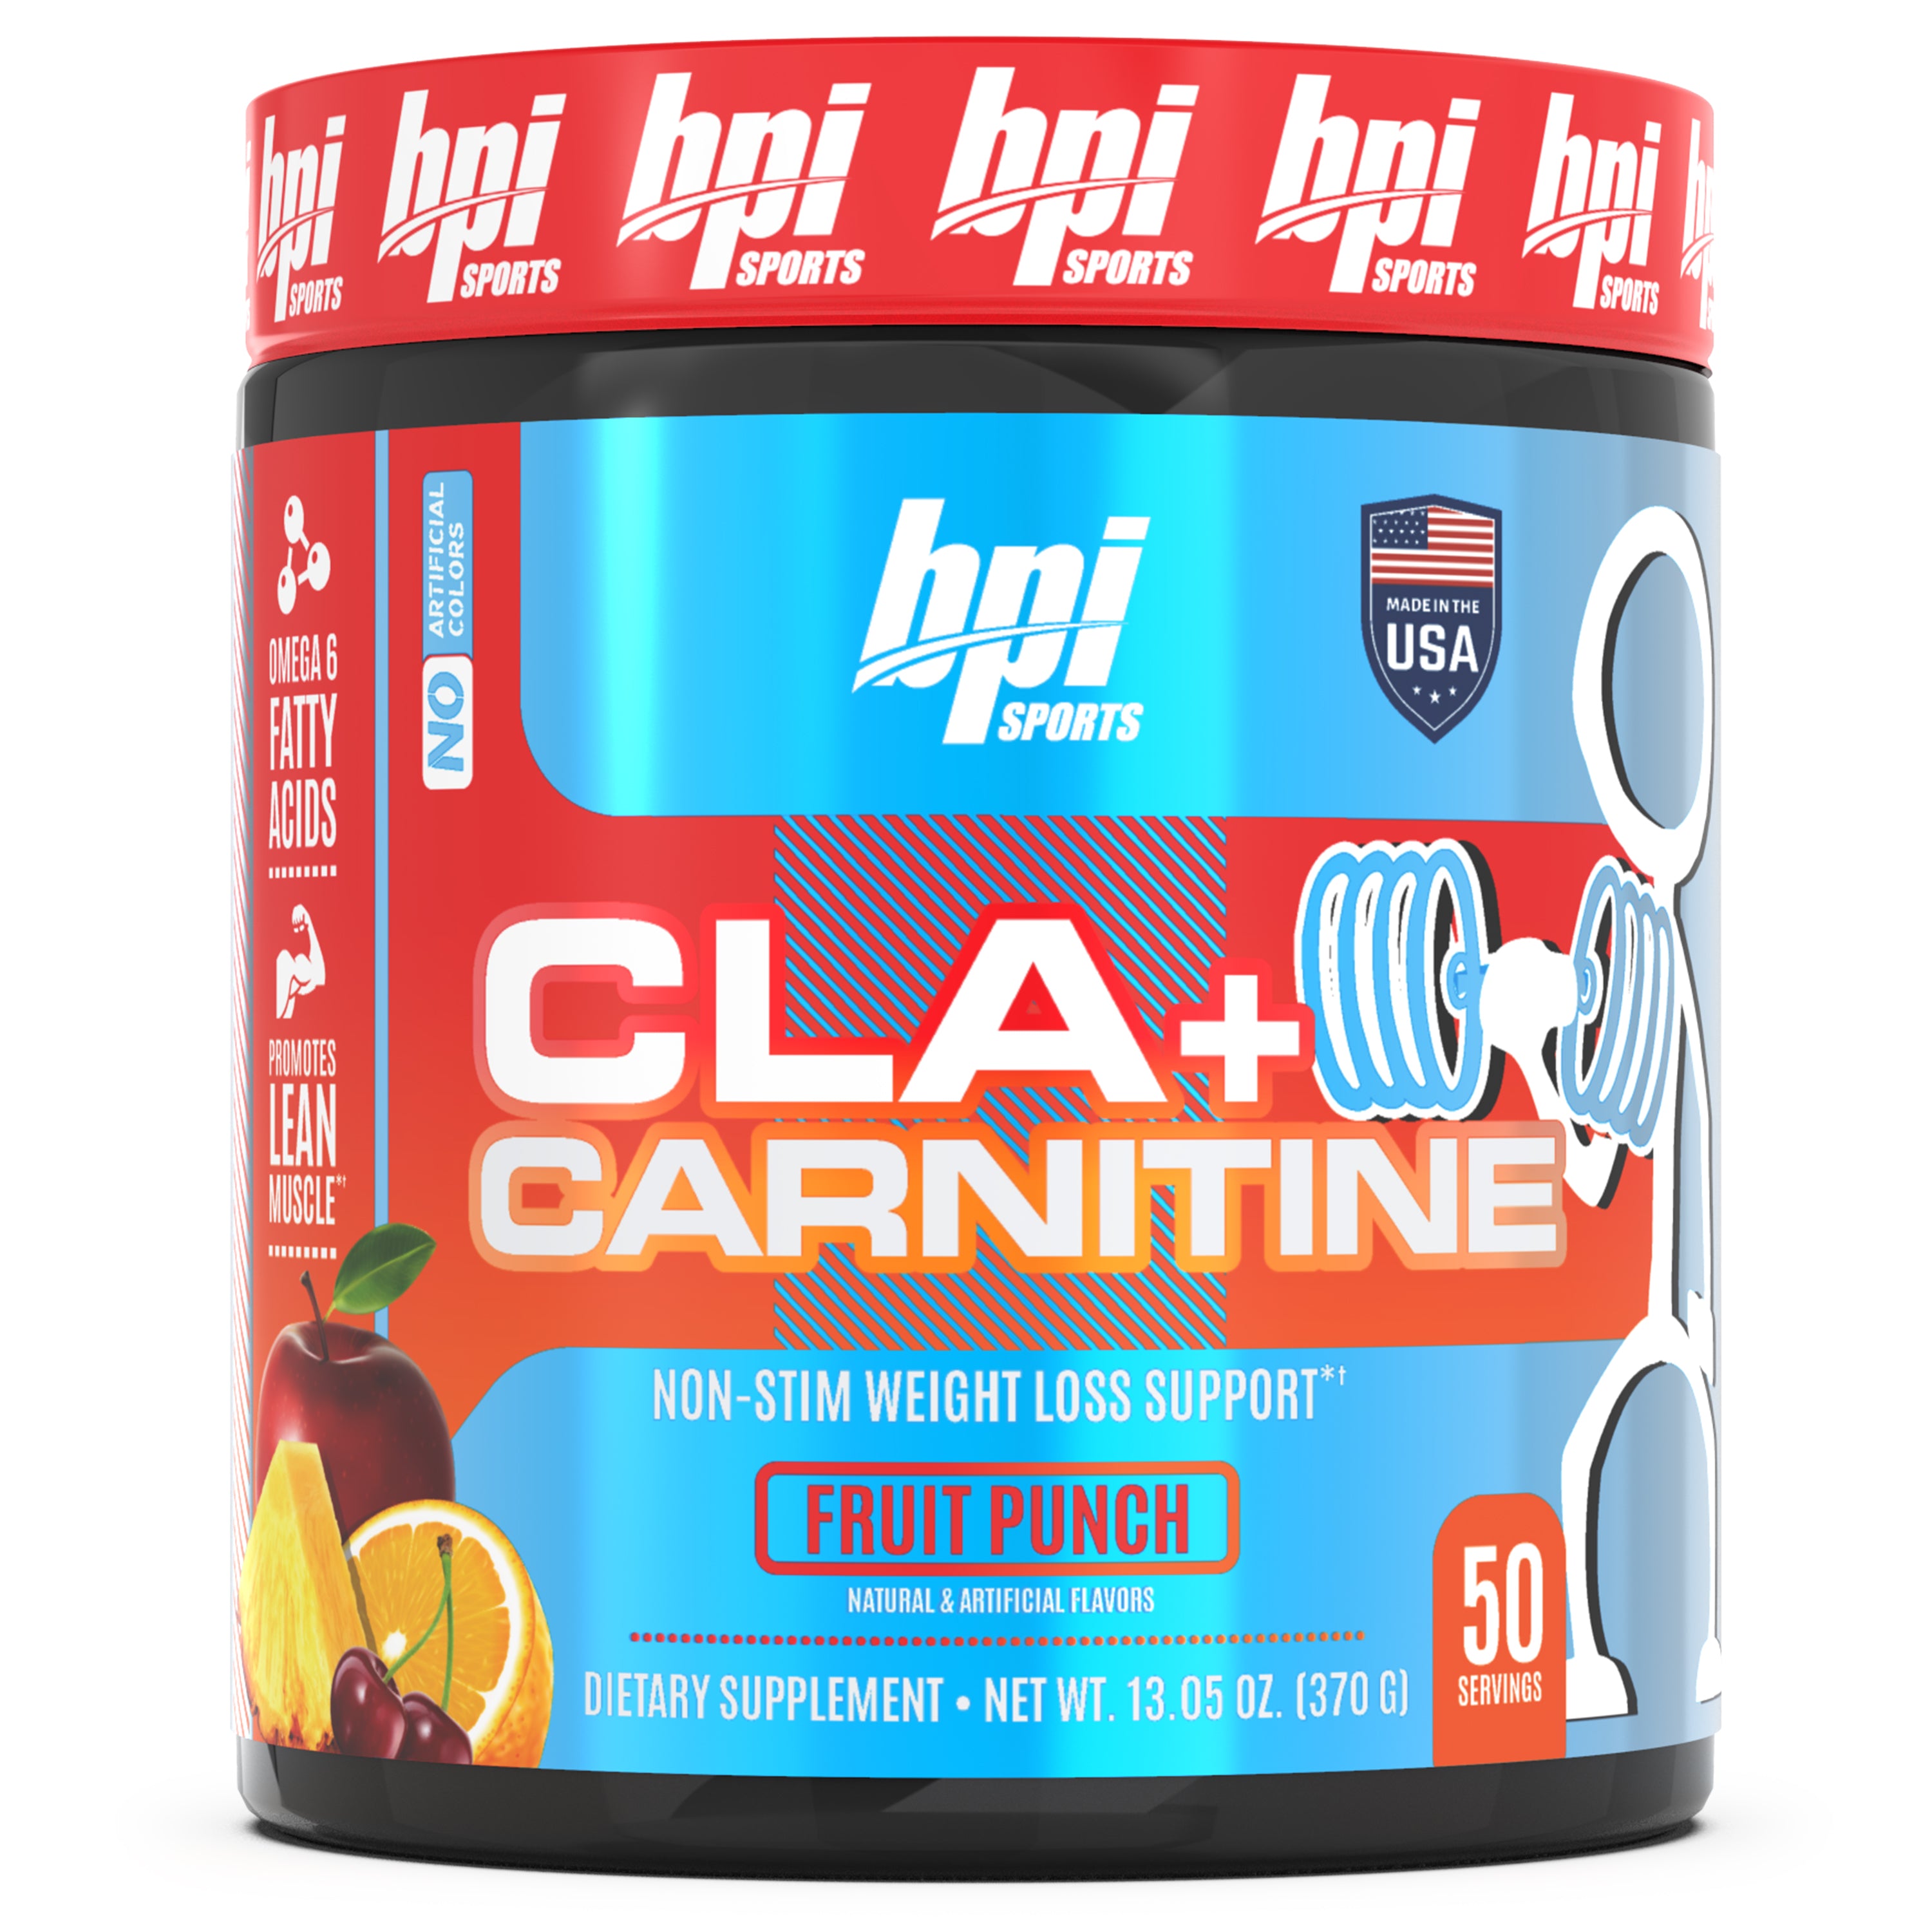 CLA + Carnitine - Non-Stimulant Weight Loss Supplement